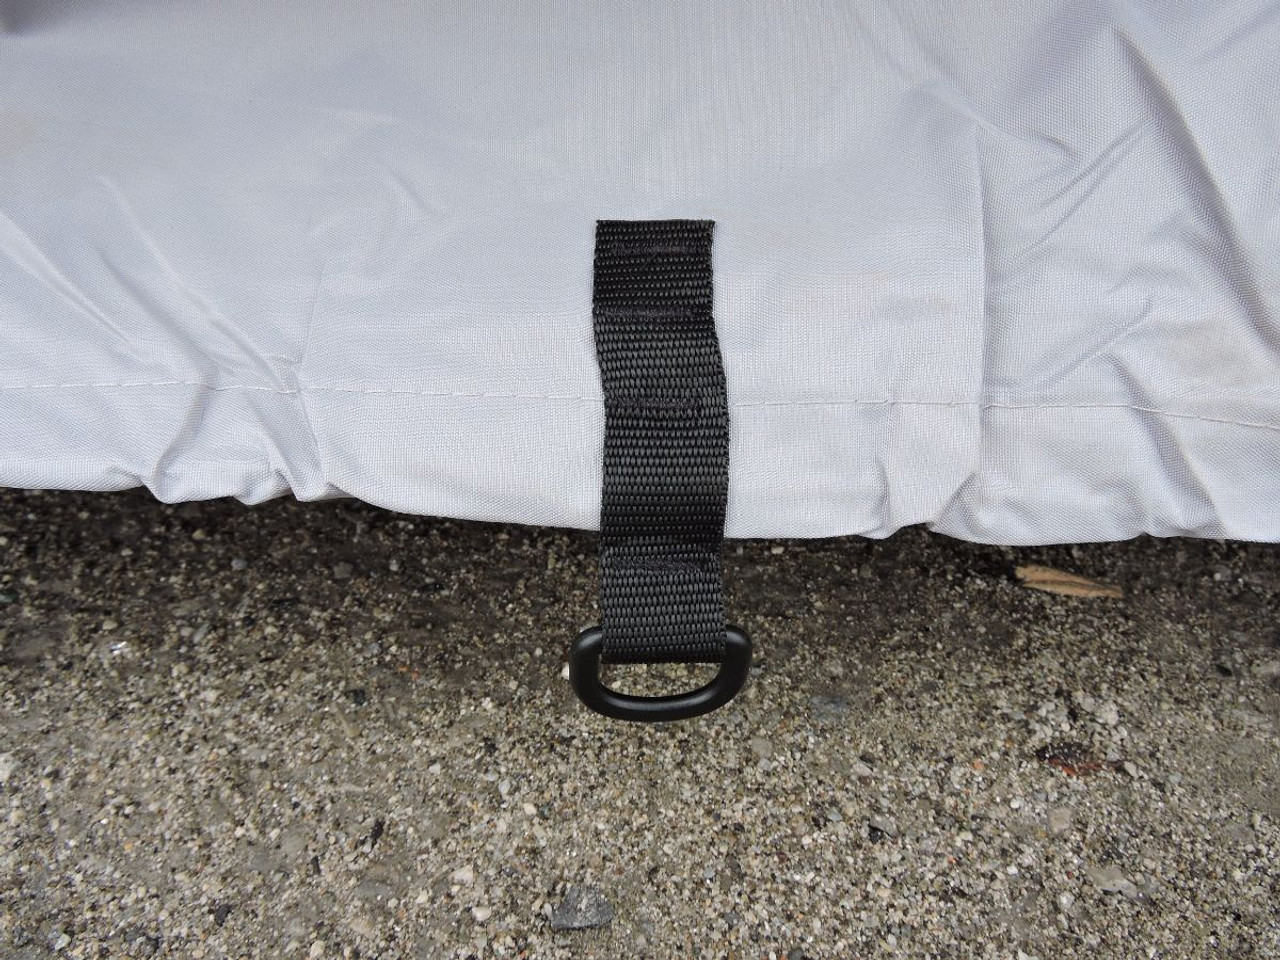 Venture ATV cover strong elastic hem and tie downs